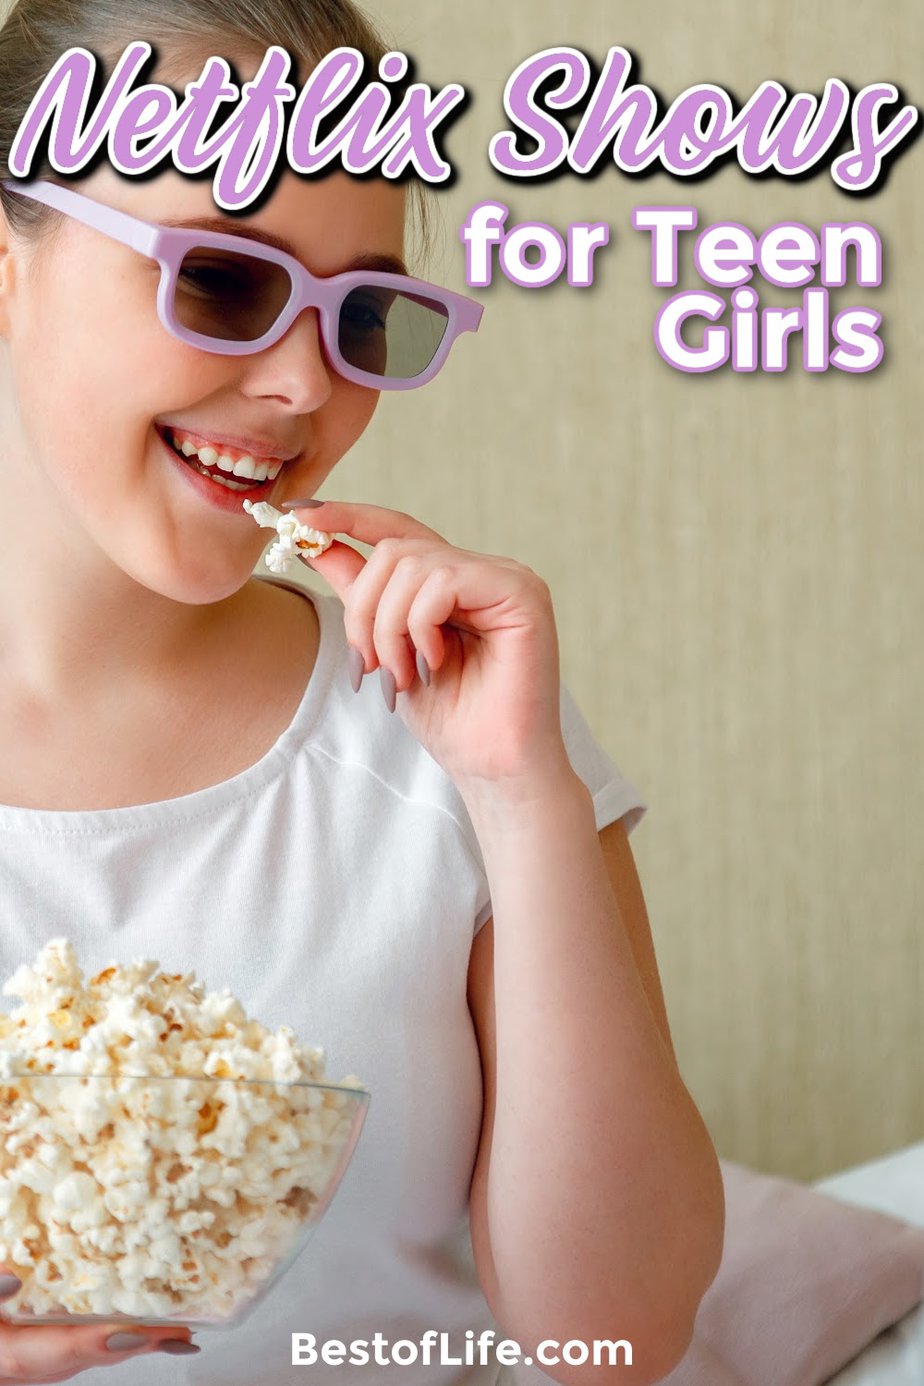 The best Netflix shows for teen girls don’t have to make you cringe as a parent, they can actually be enjoyed by everyone. Shows for Teens on Netflix | Netflix Shows for Teens | Netflix Shows for Young Adults | Best Netflix Shows | Teen Shows on Netflix | Teen Streaming Ideas | Netflix Shows for Girls | Romantic Teen Shows | Teen Netflix Dramas #netflix #teens